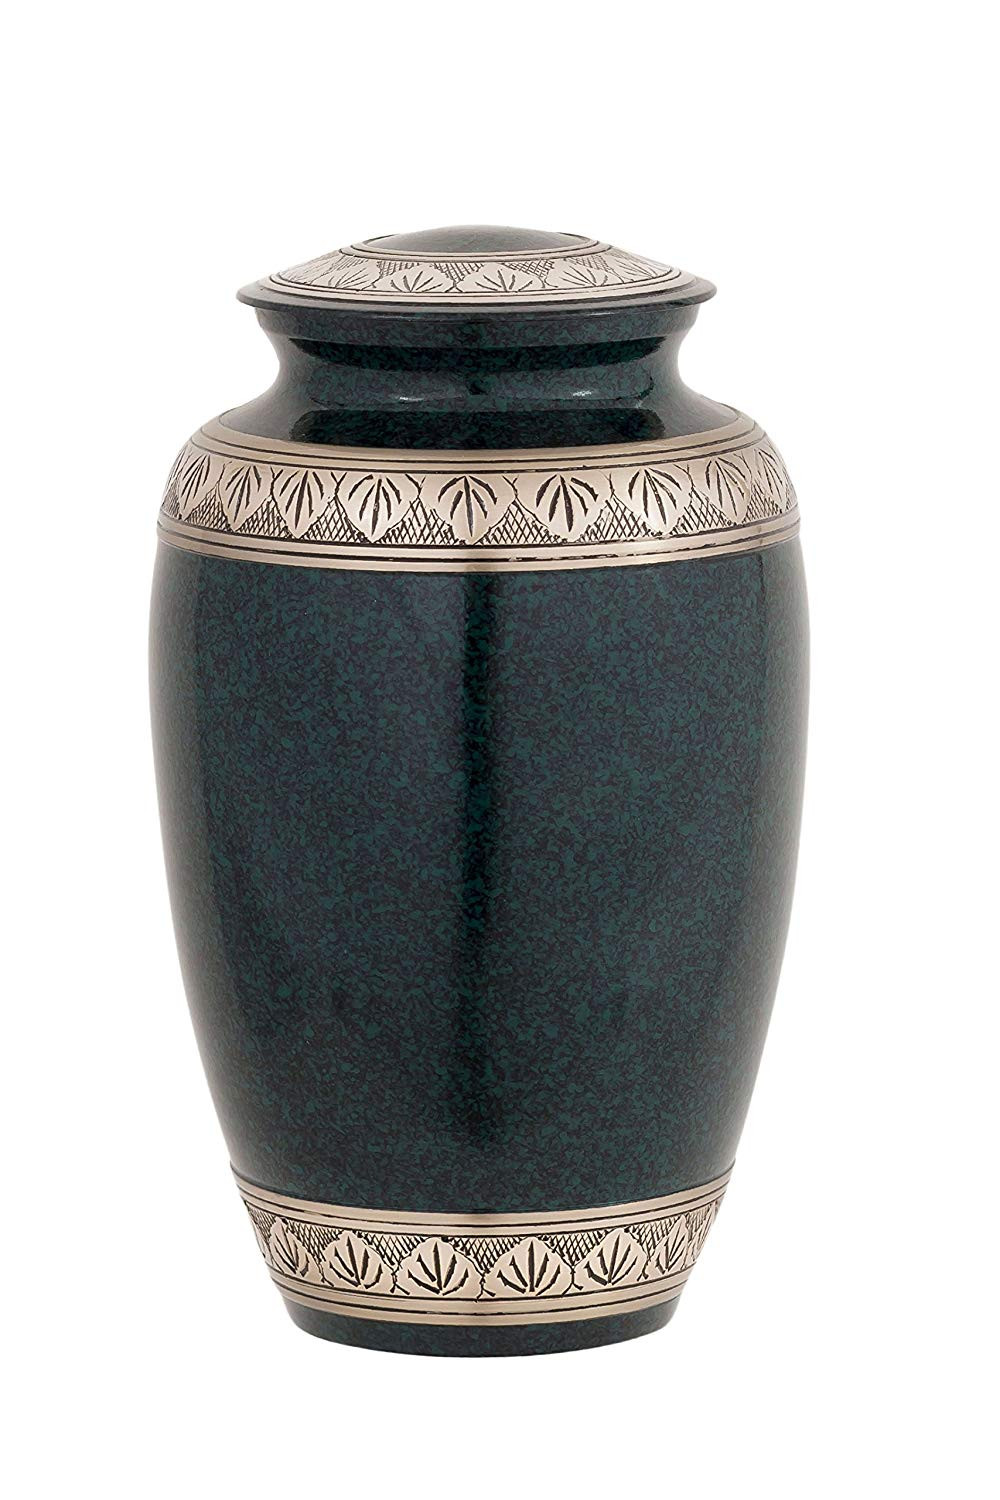 24 Unique Large Silver Vases Urns 2024 free download large silver vases urns of amazon com enshrined memorials cremation urn for ashes electra throughout amazon com enshrined memorials cremation urn for ashes electra series affordable solid br